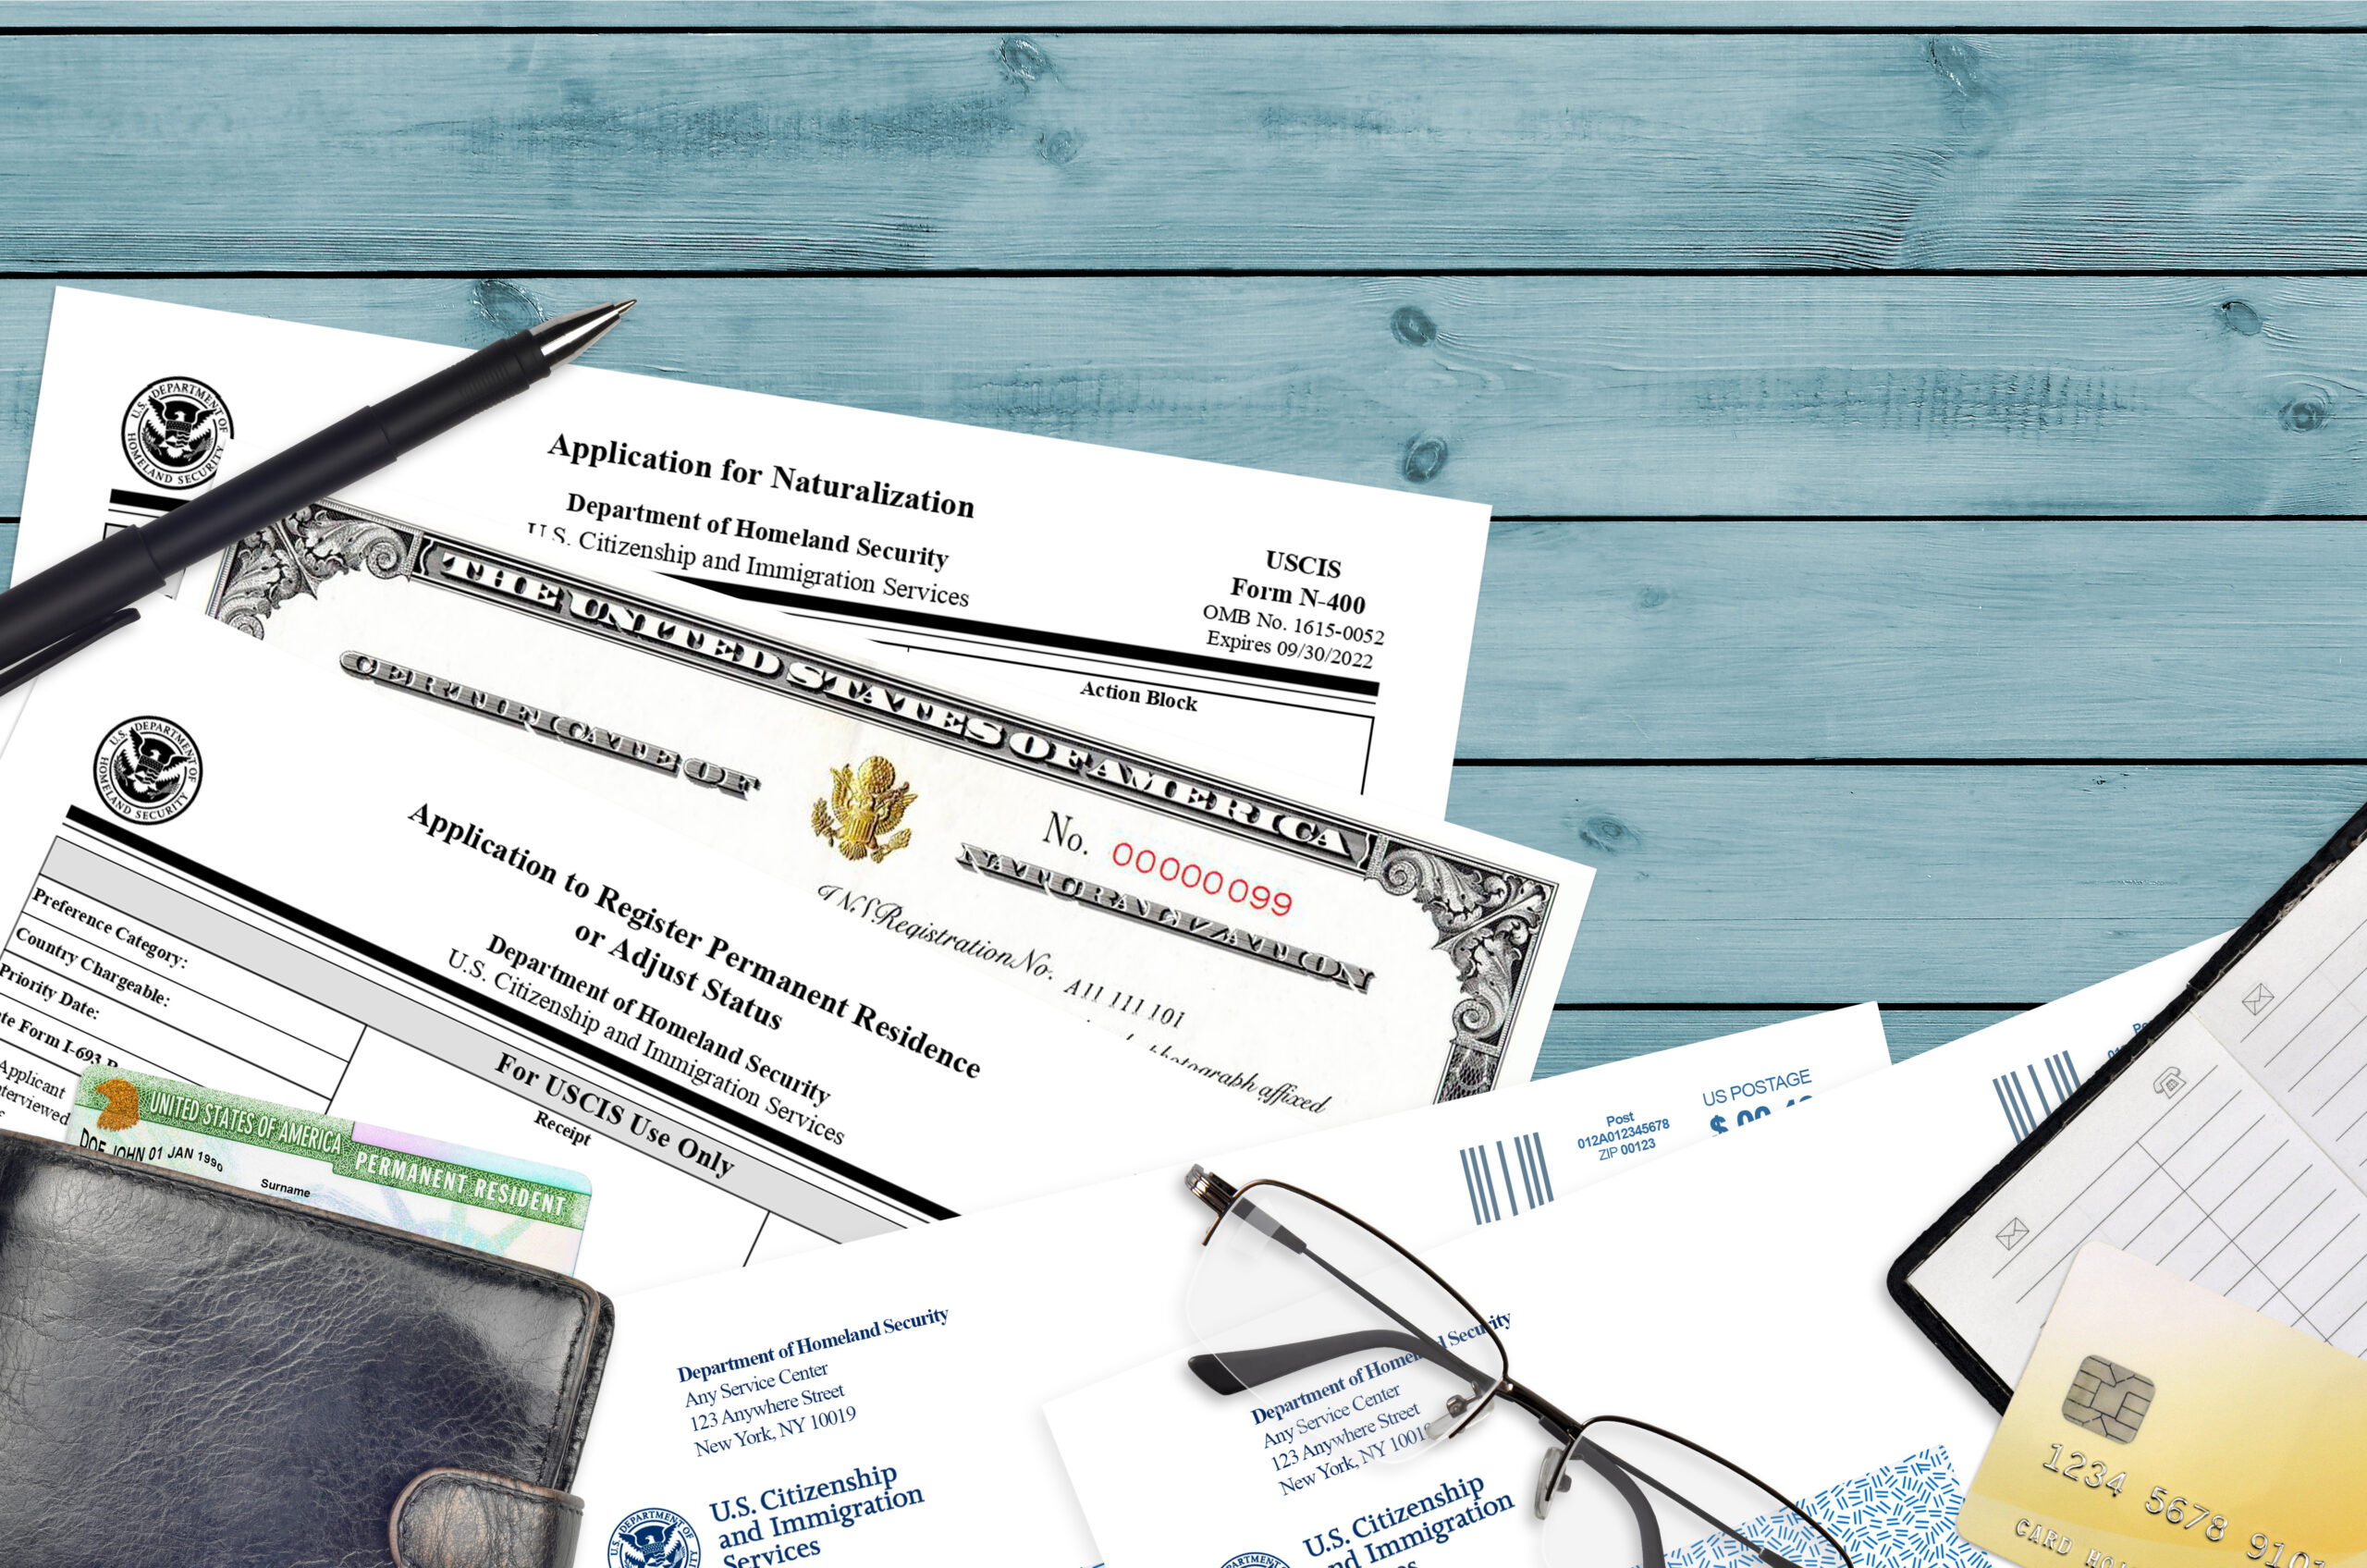 USCIS form I-485 Application to register permanent residence or adjust status and N-400 Application for naturalization with Certificate of naturalization